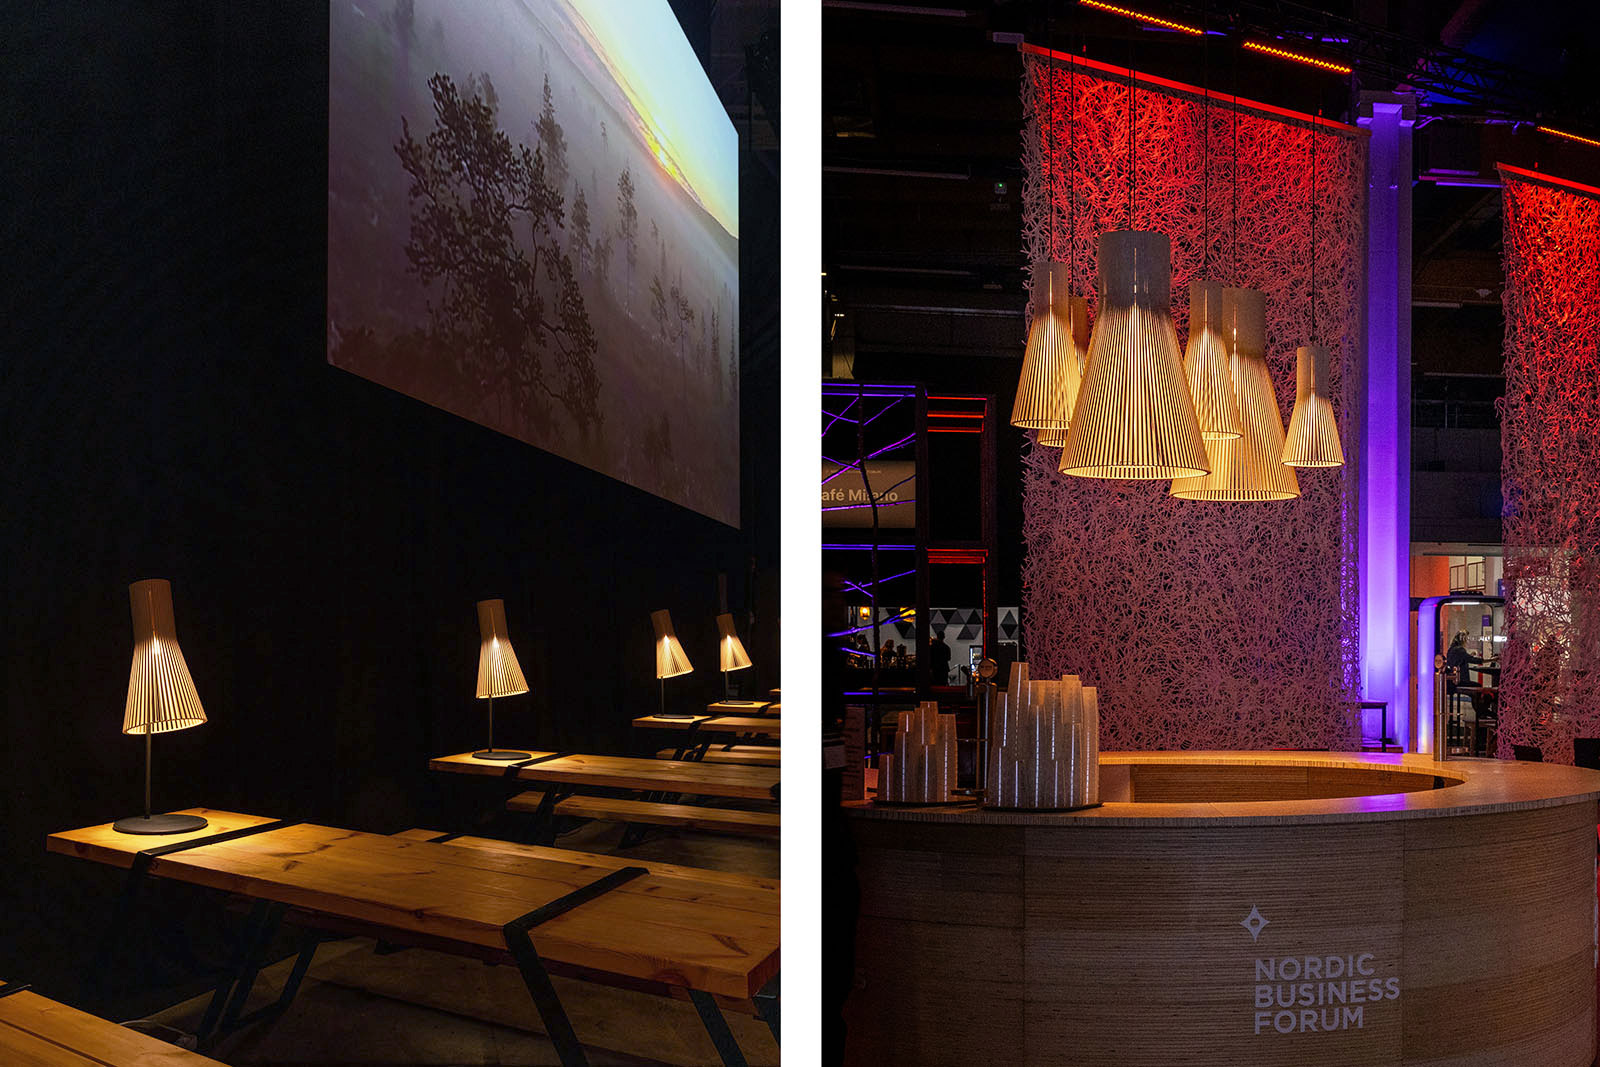 Table lamps on wooden tables. A lamp group above a bar.